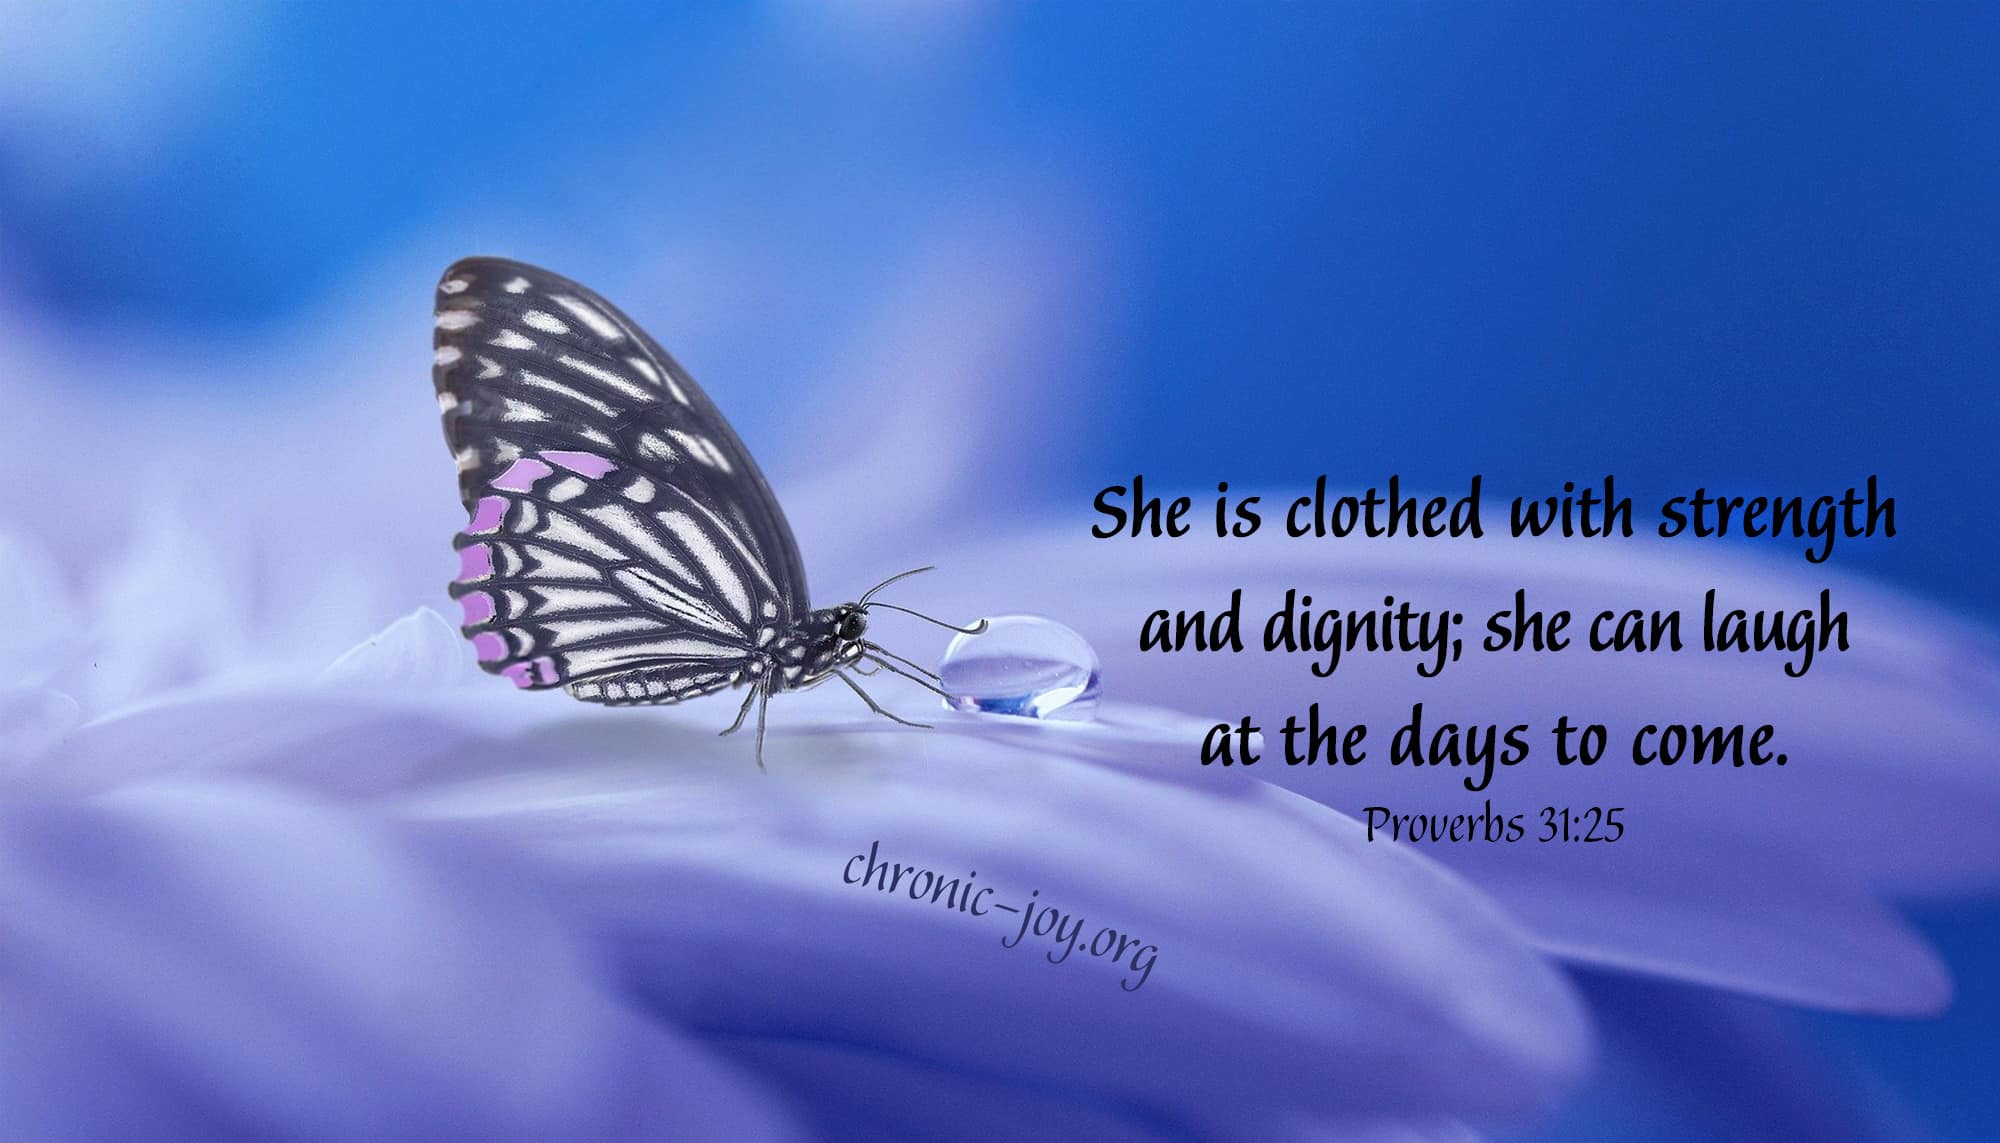 Clothed with Strength and Dignity yet Chronically Ill • Chronic Joy®